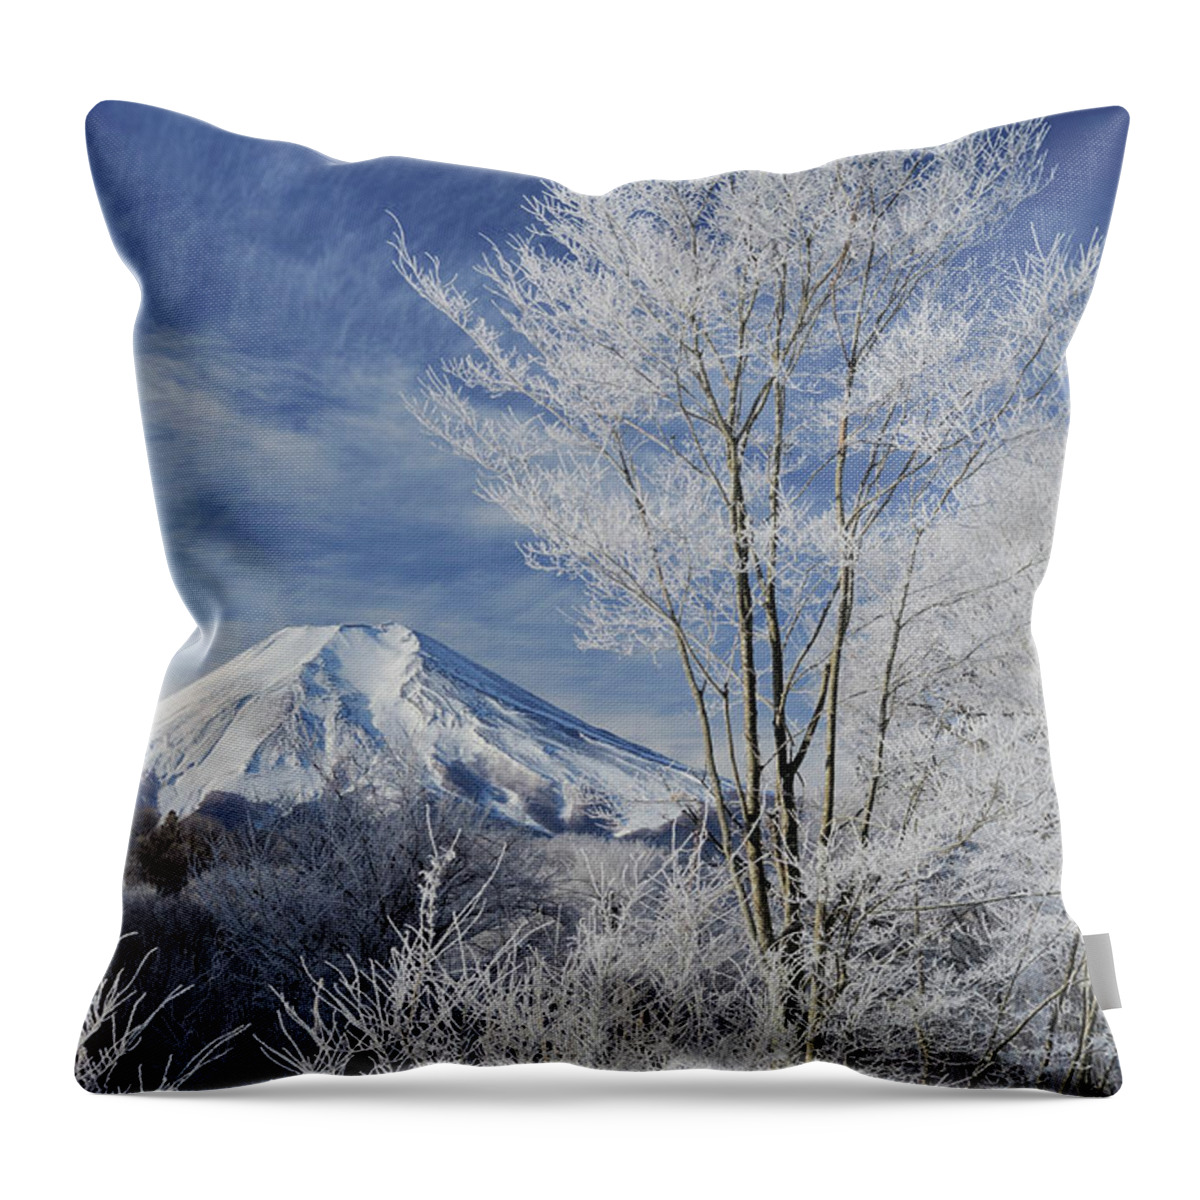 Tranquility Throw Pillow featuring the photograph Mt. Fuji And Frost-covered Trees #1 by Toyofumi Mori